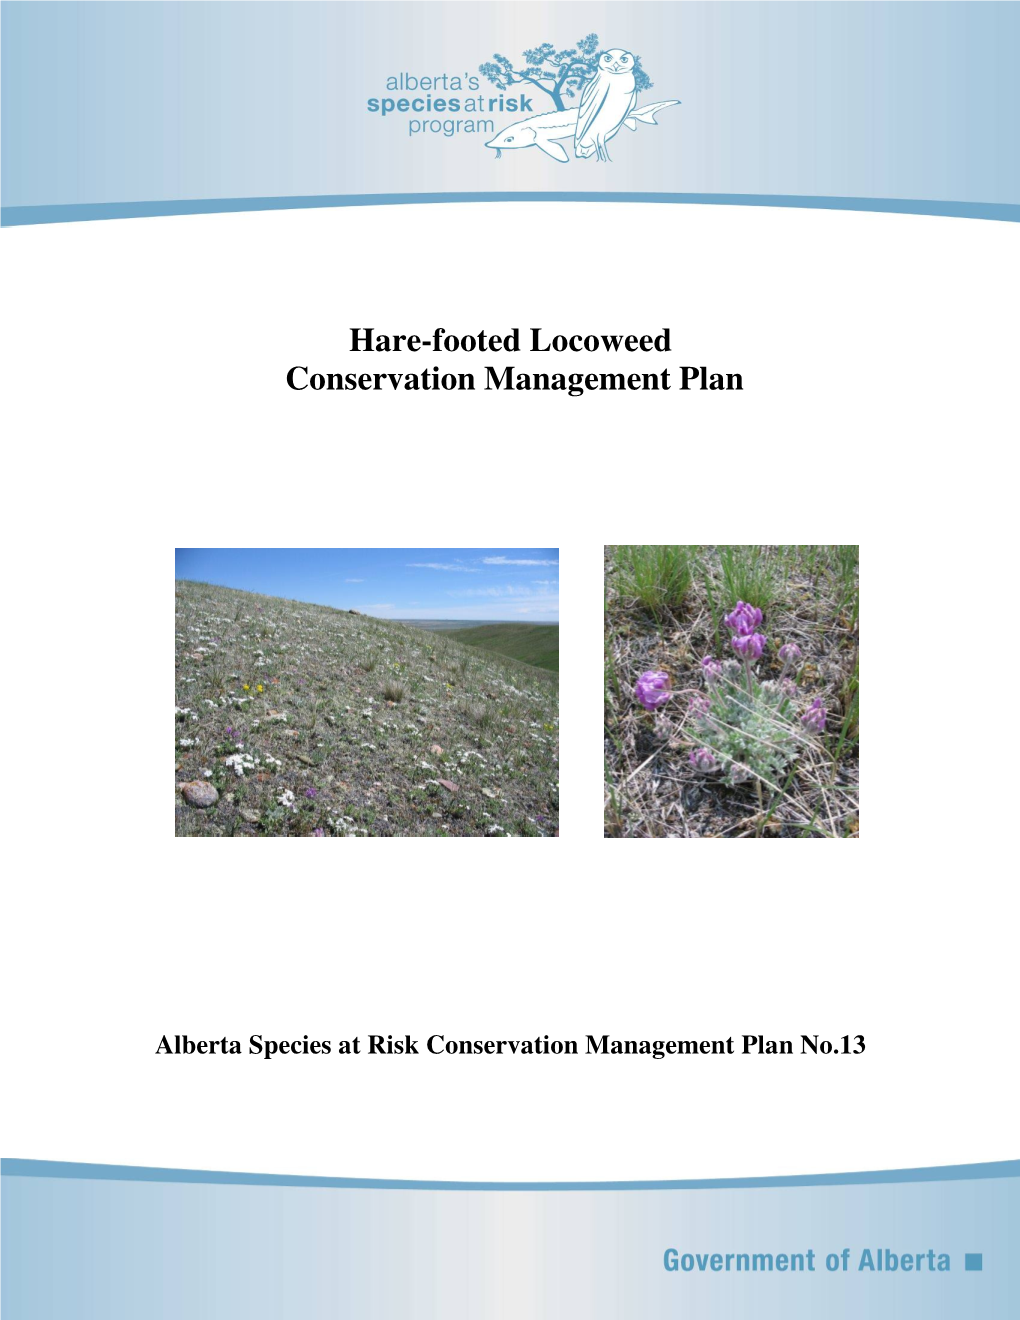 Hare-Footed Locoweed Conservation Management Plan